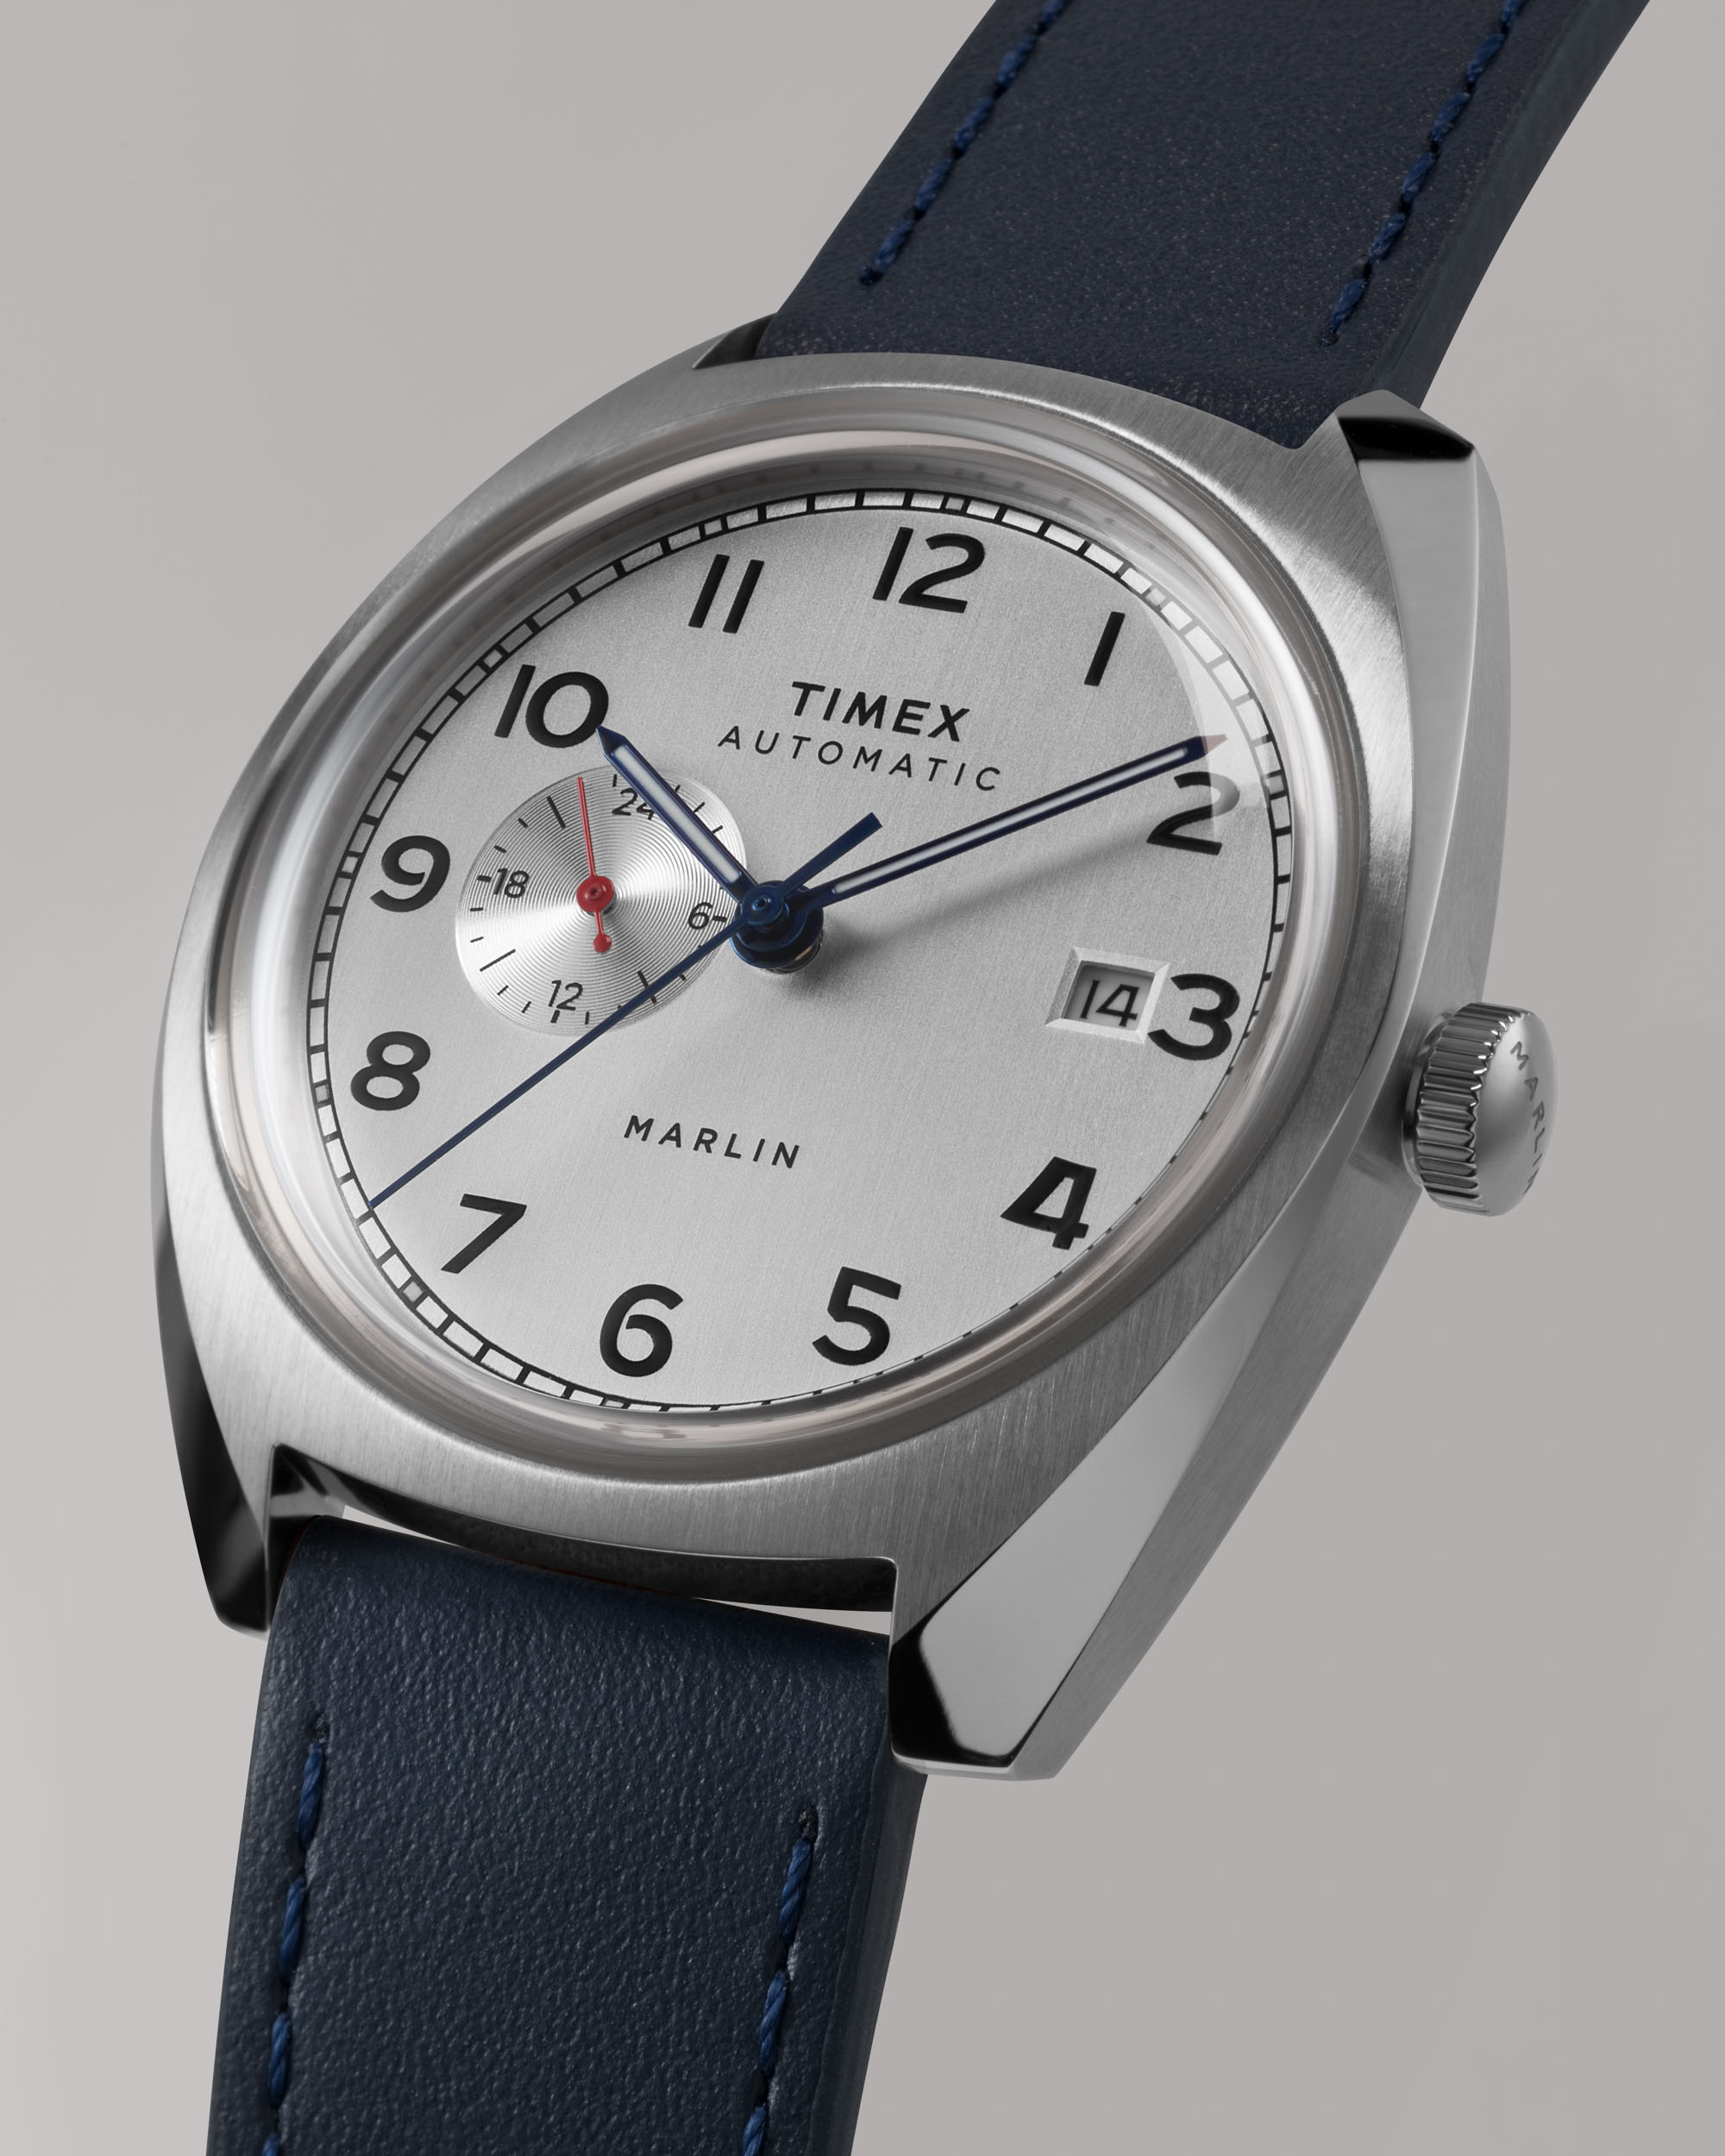 Timex Unveils The Marlin Automatic Sub-Dial Watch | aBlogtoWatch